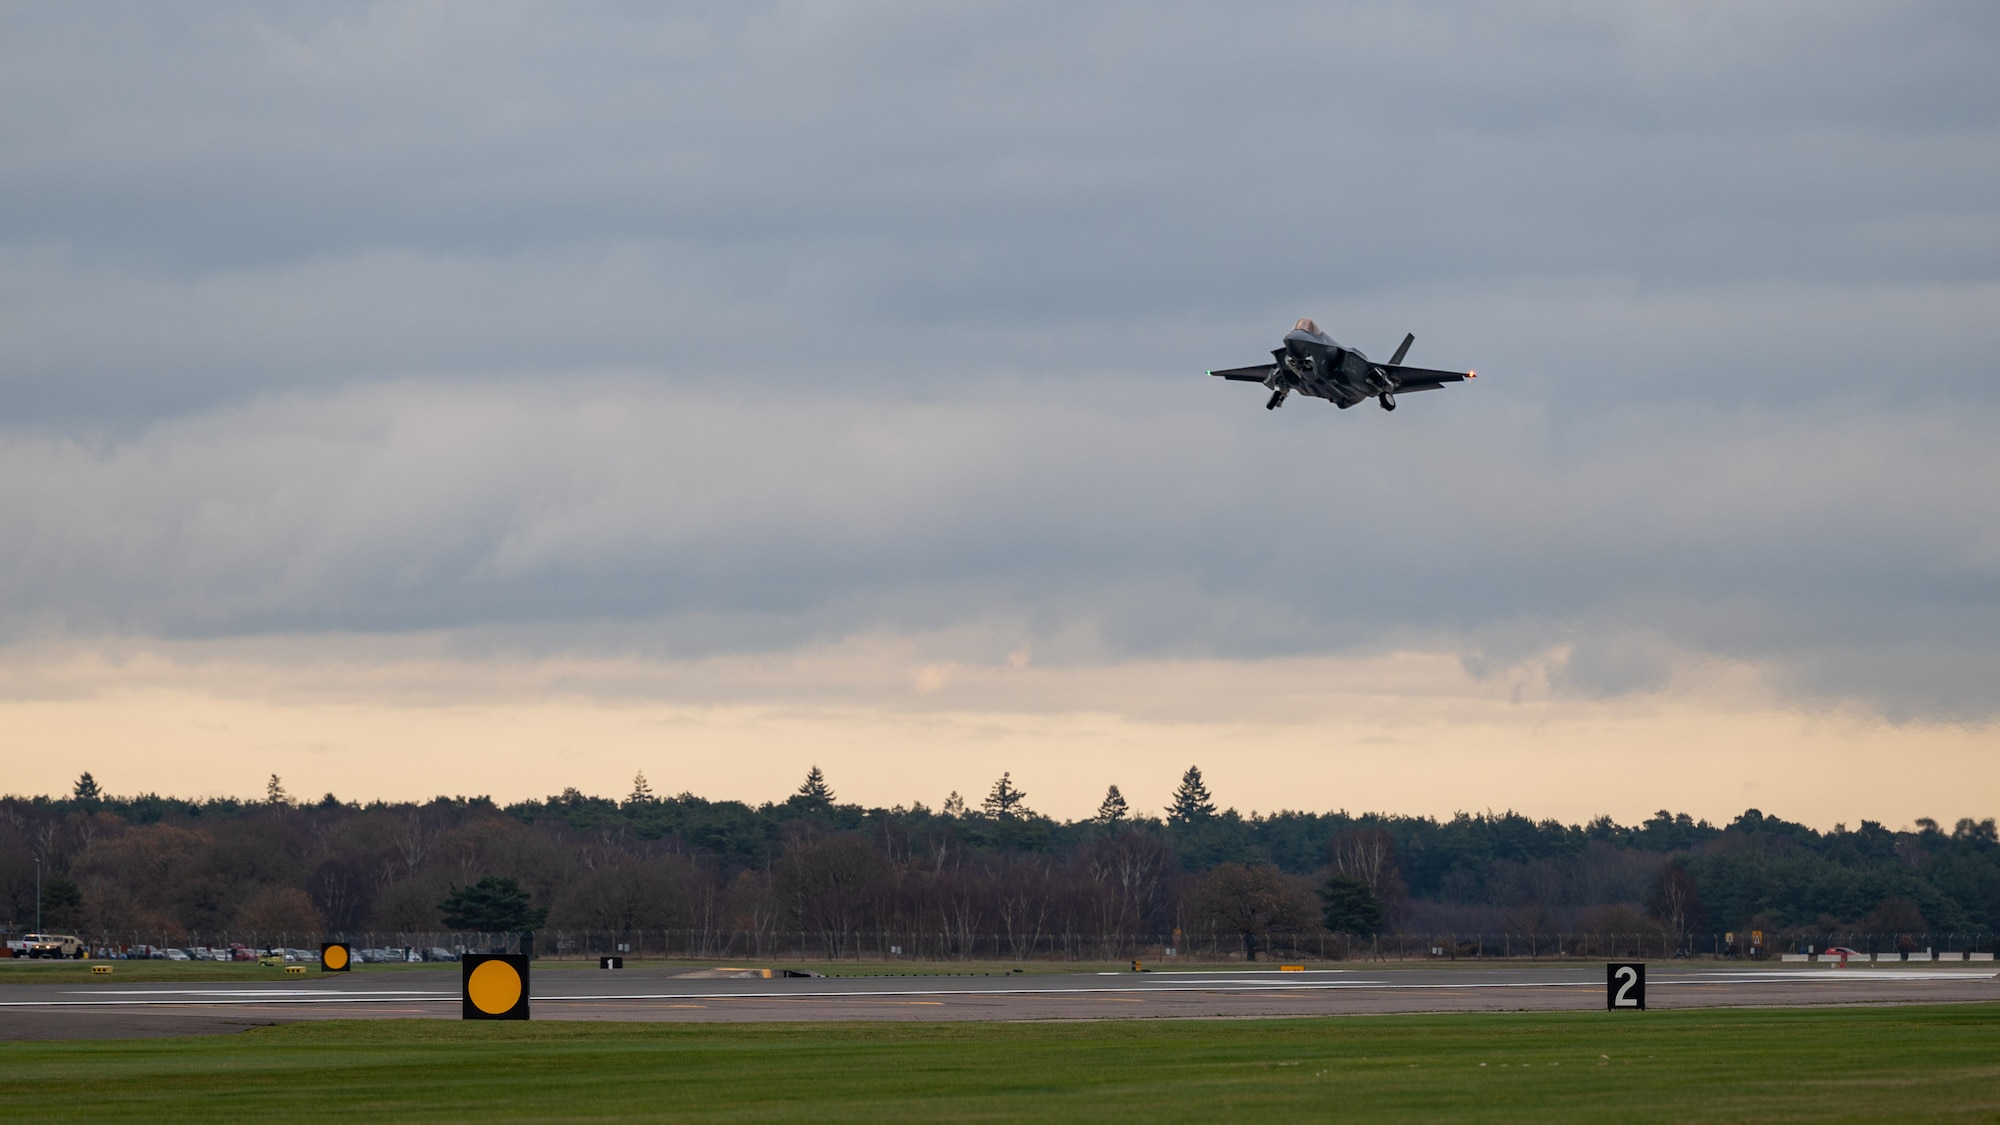 A U.S. Air Force F-35A Lightning II assigned to the 495th Fighter Squadron lowers landing gear upon arrival at Royal Air Force Lakenheath, Dec. 15, 2021. The arrival of the 5th-generation aircraft at the Liberty Wing has been planned since 2015, marking its placement within the United Kingdom a critical component for training and combat readiness due to airspace and F-35 program partnership.(U.S. Air Force photo by Senior Airman Koby I. Saunders)